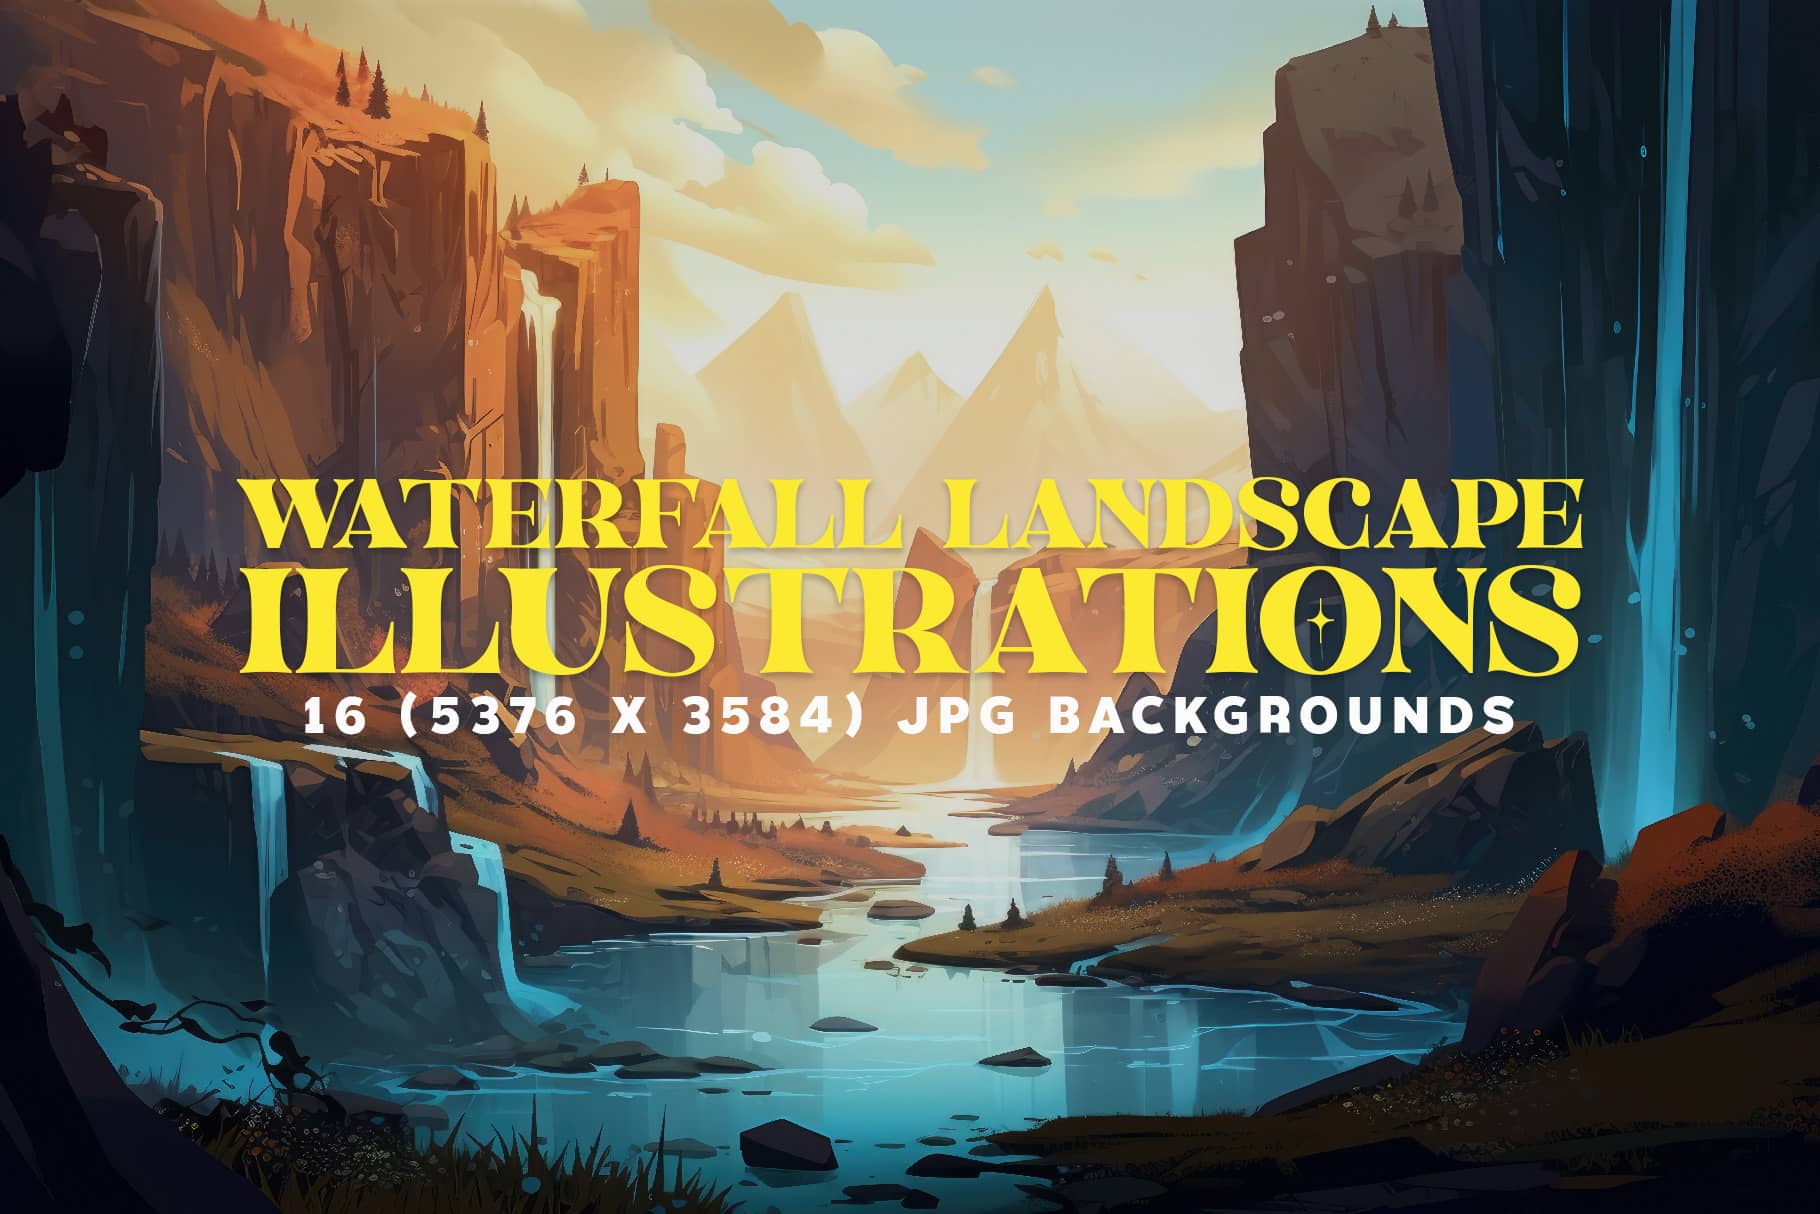 Watefall Landscape Illustrations Cover